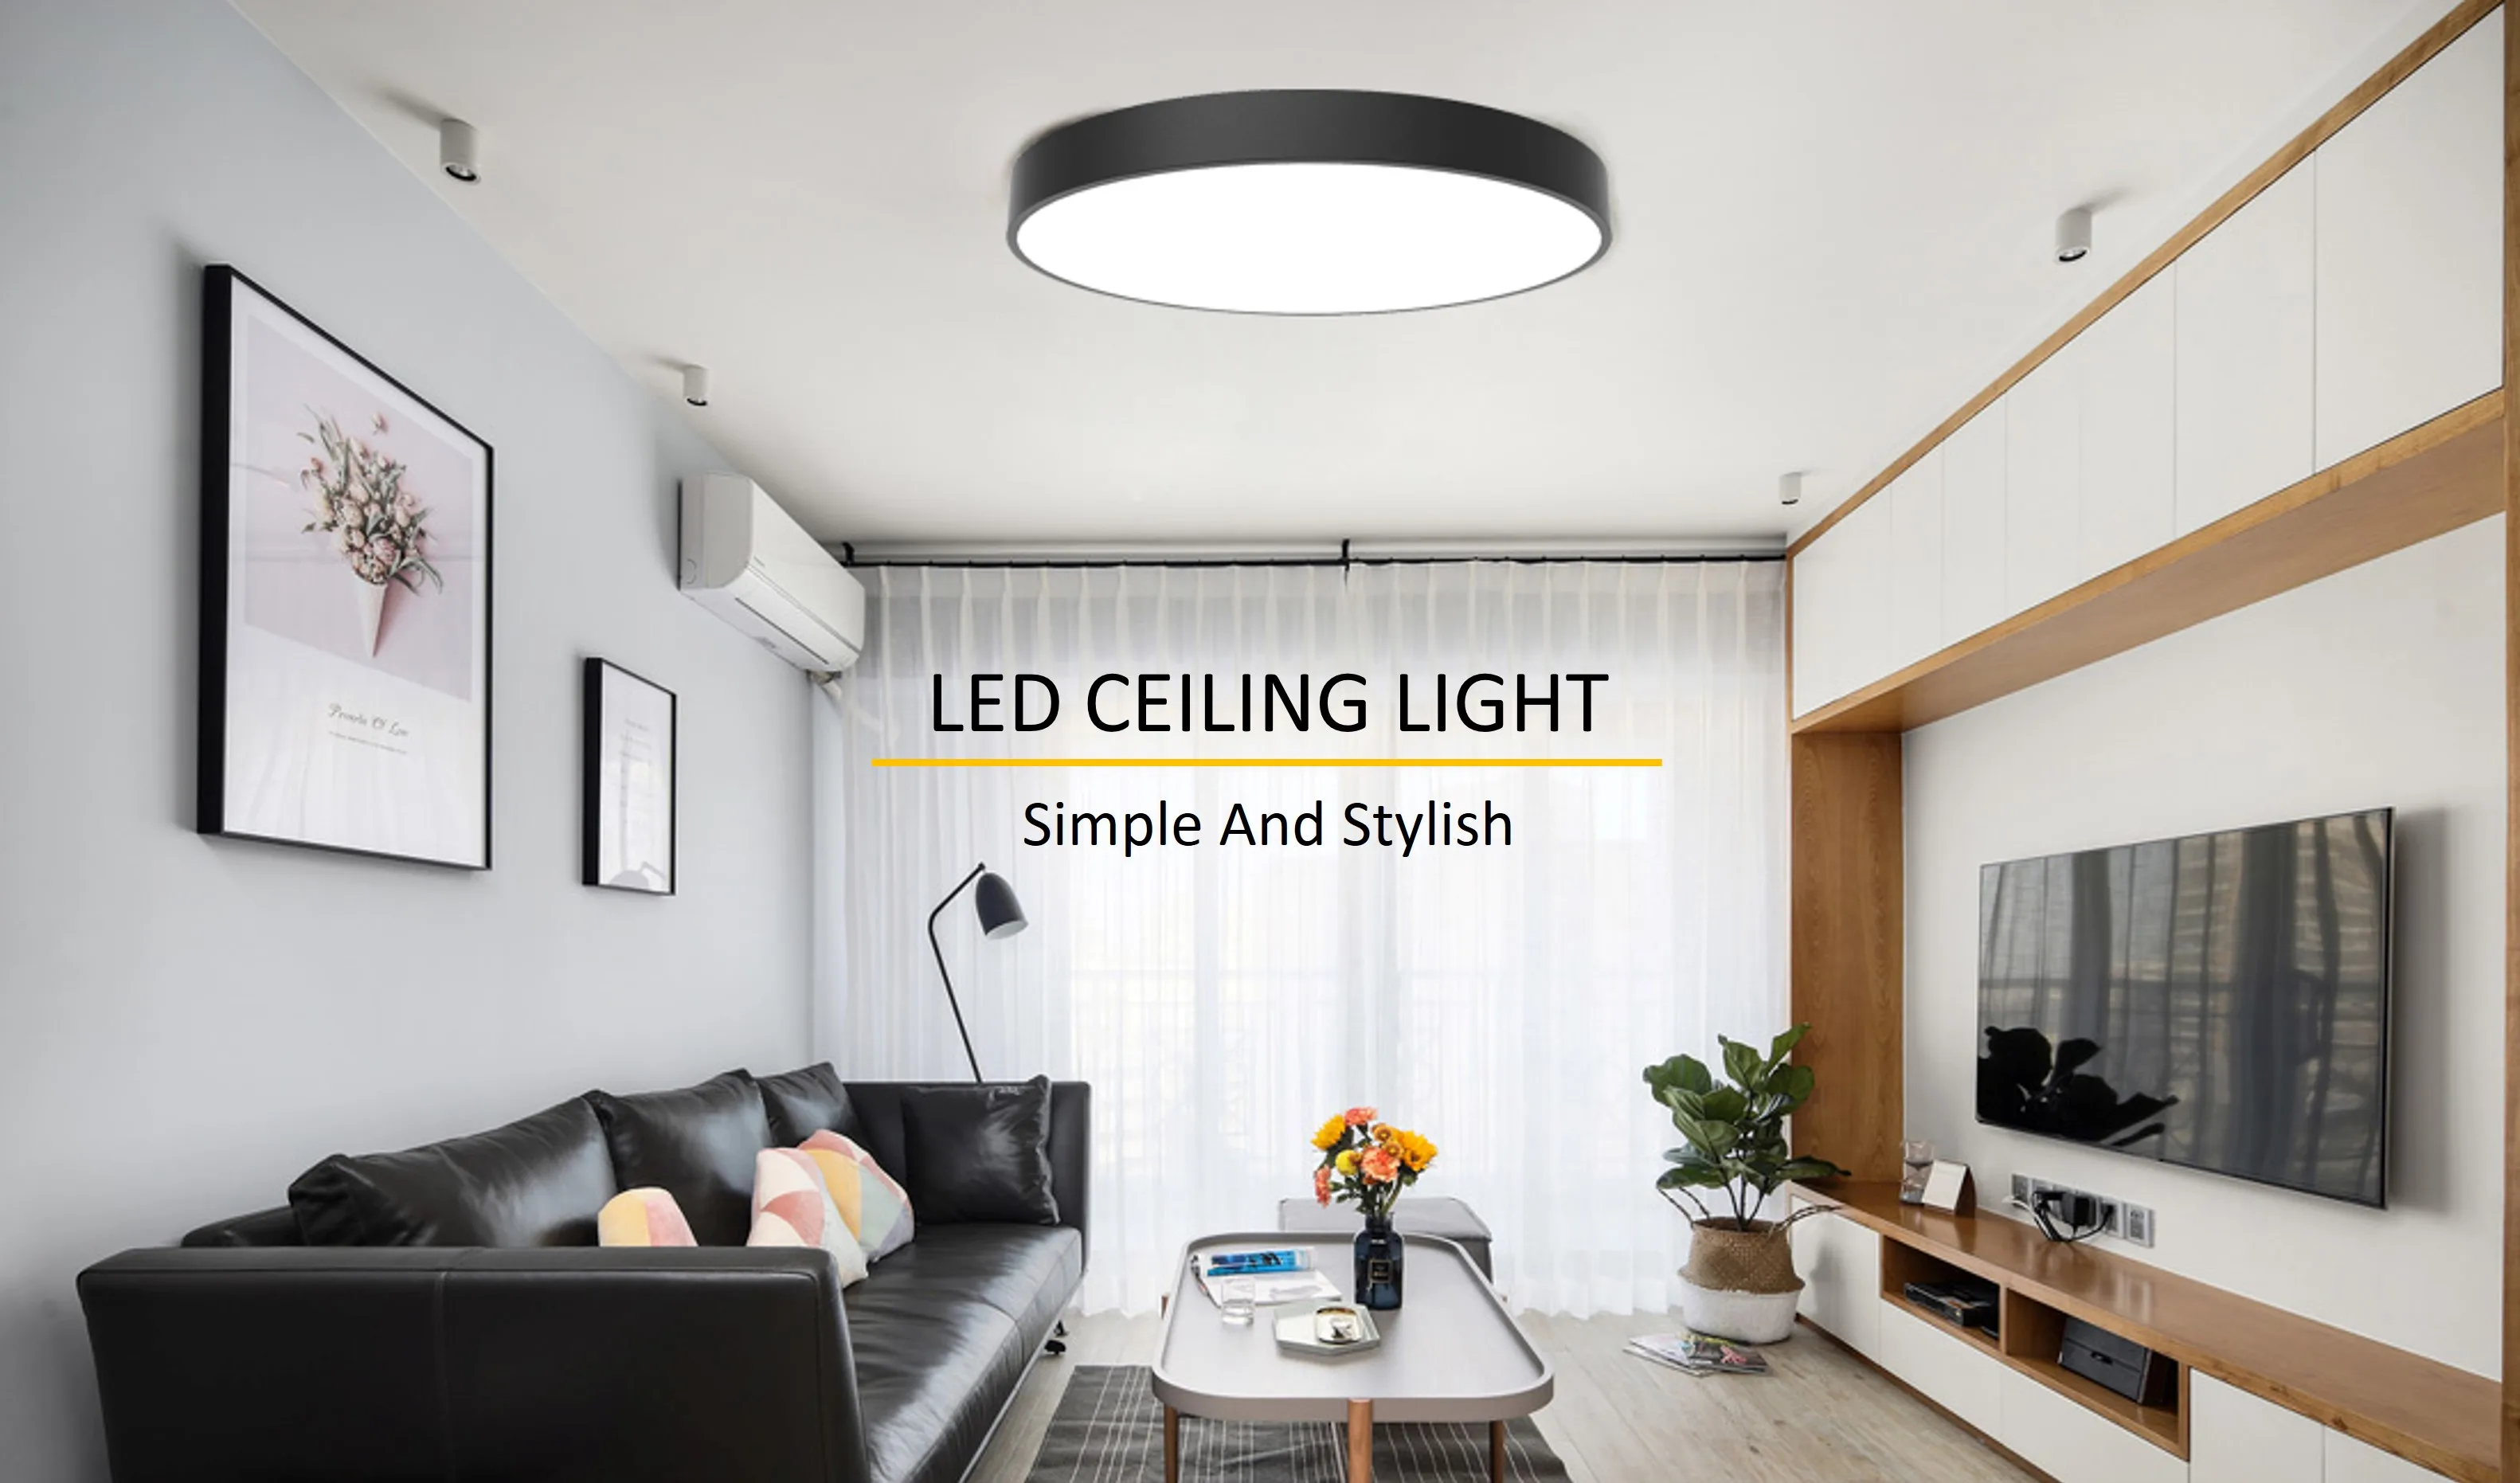 Ceiling Spot Light Design: Choose the Right for Your Application